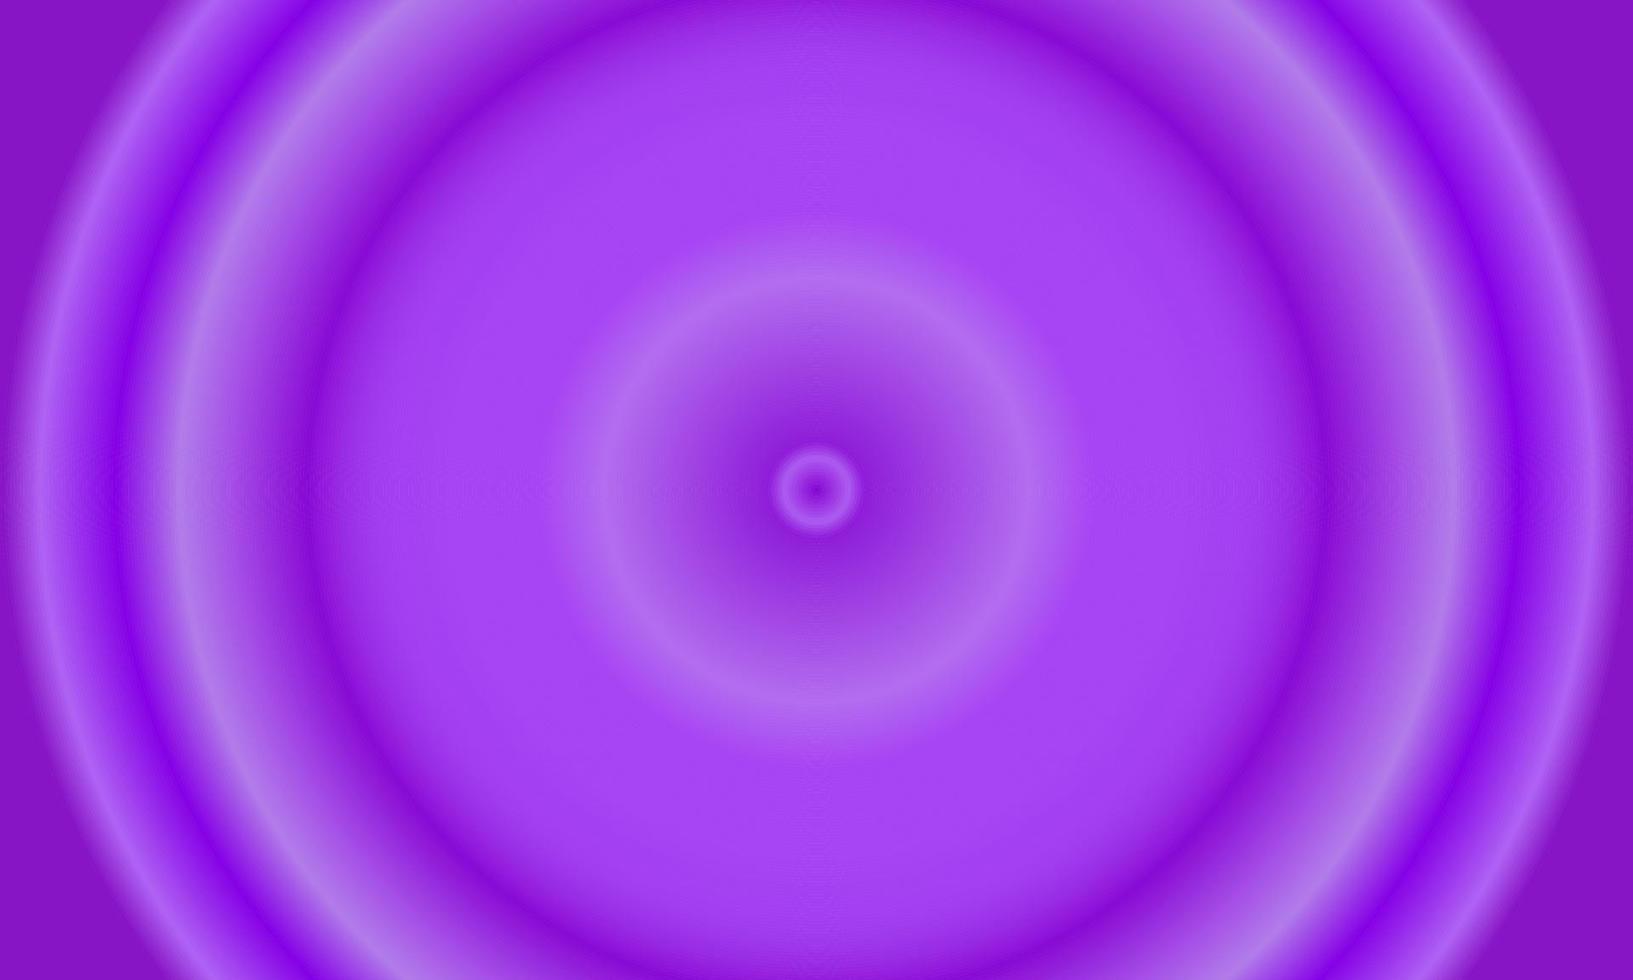 purple circle radial gradient abstract background. simple, blur, shiny, modern and colorful style. use for homepage, backgdrop, wallpaper, card, cover, poster, banner or flyer vector